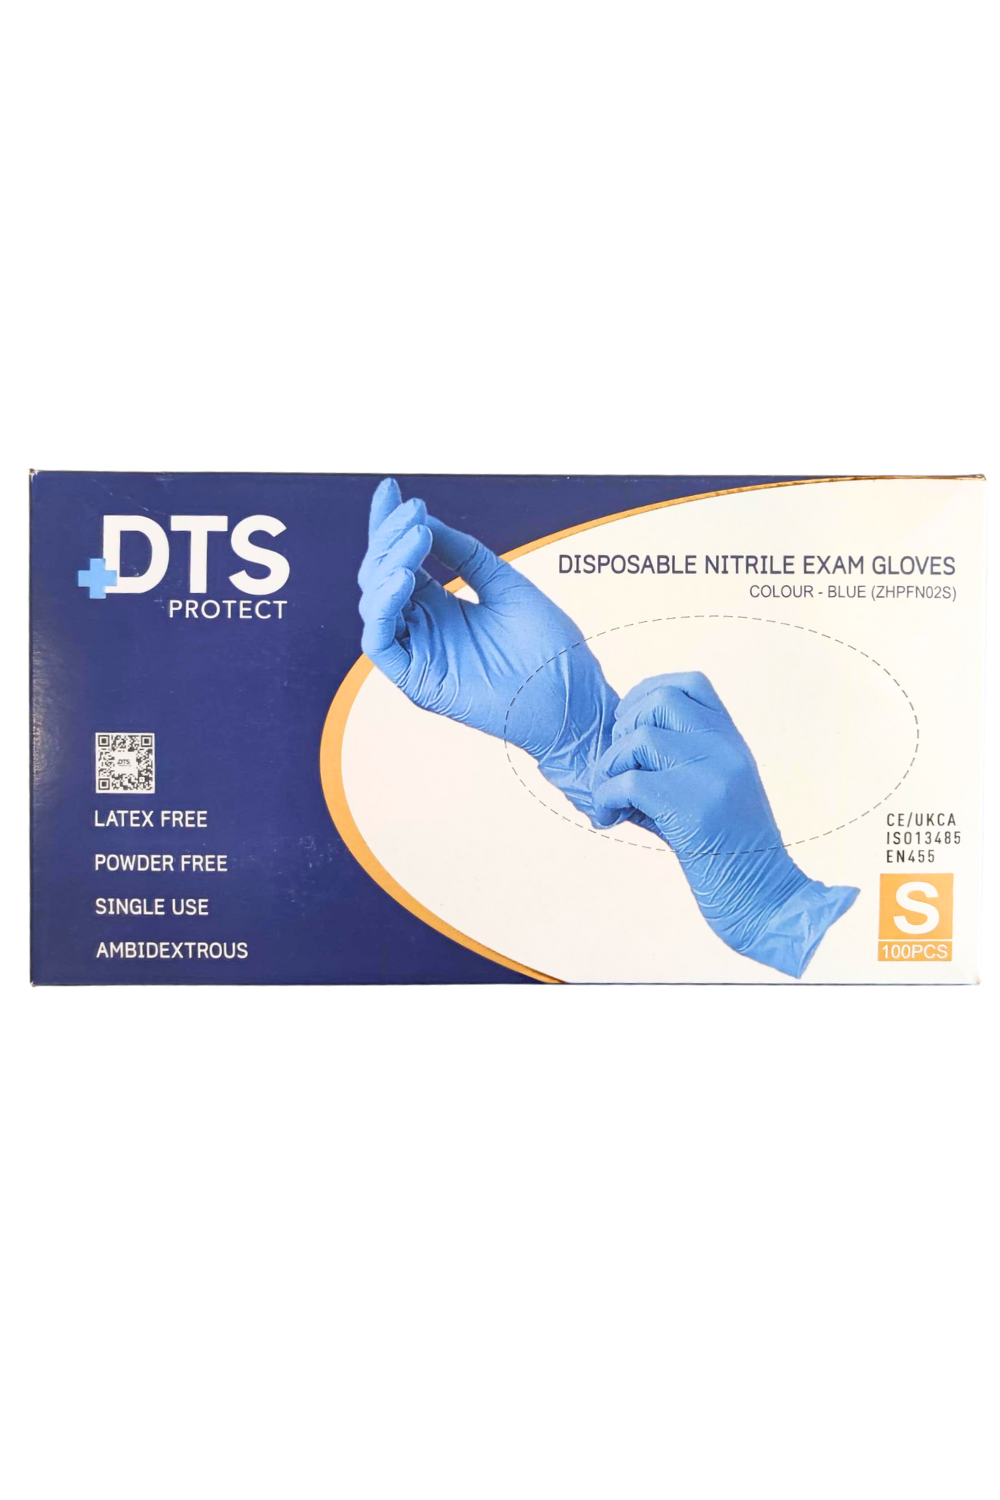 DTS Protect - Disposable Nitrile Exam Gloves, Blue, (SMALL) (10x100) CAT III